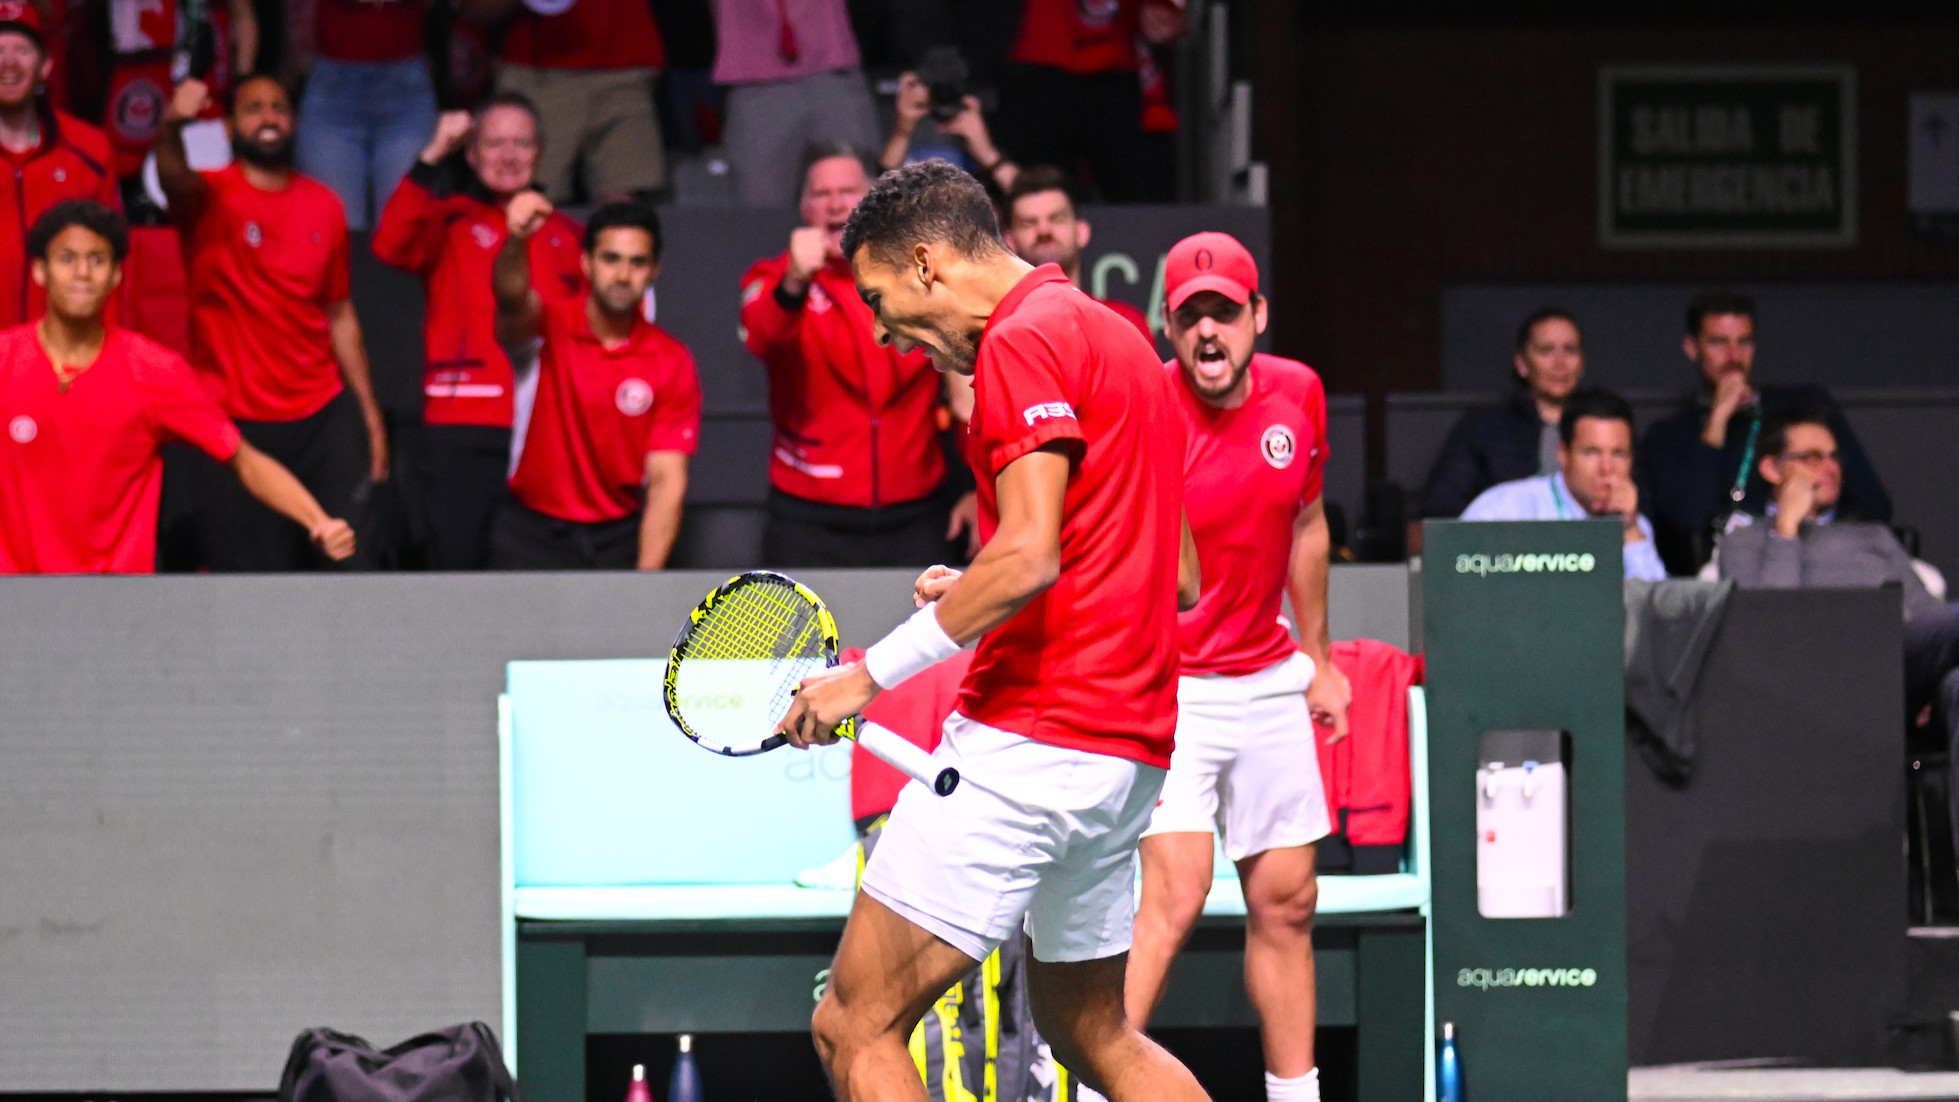 Canada takes advantage of its return to Malaga to defend its Davis Cup title